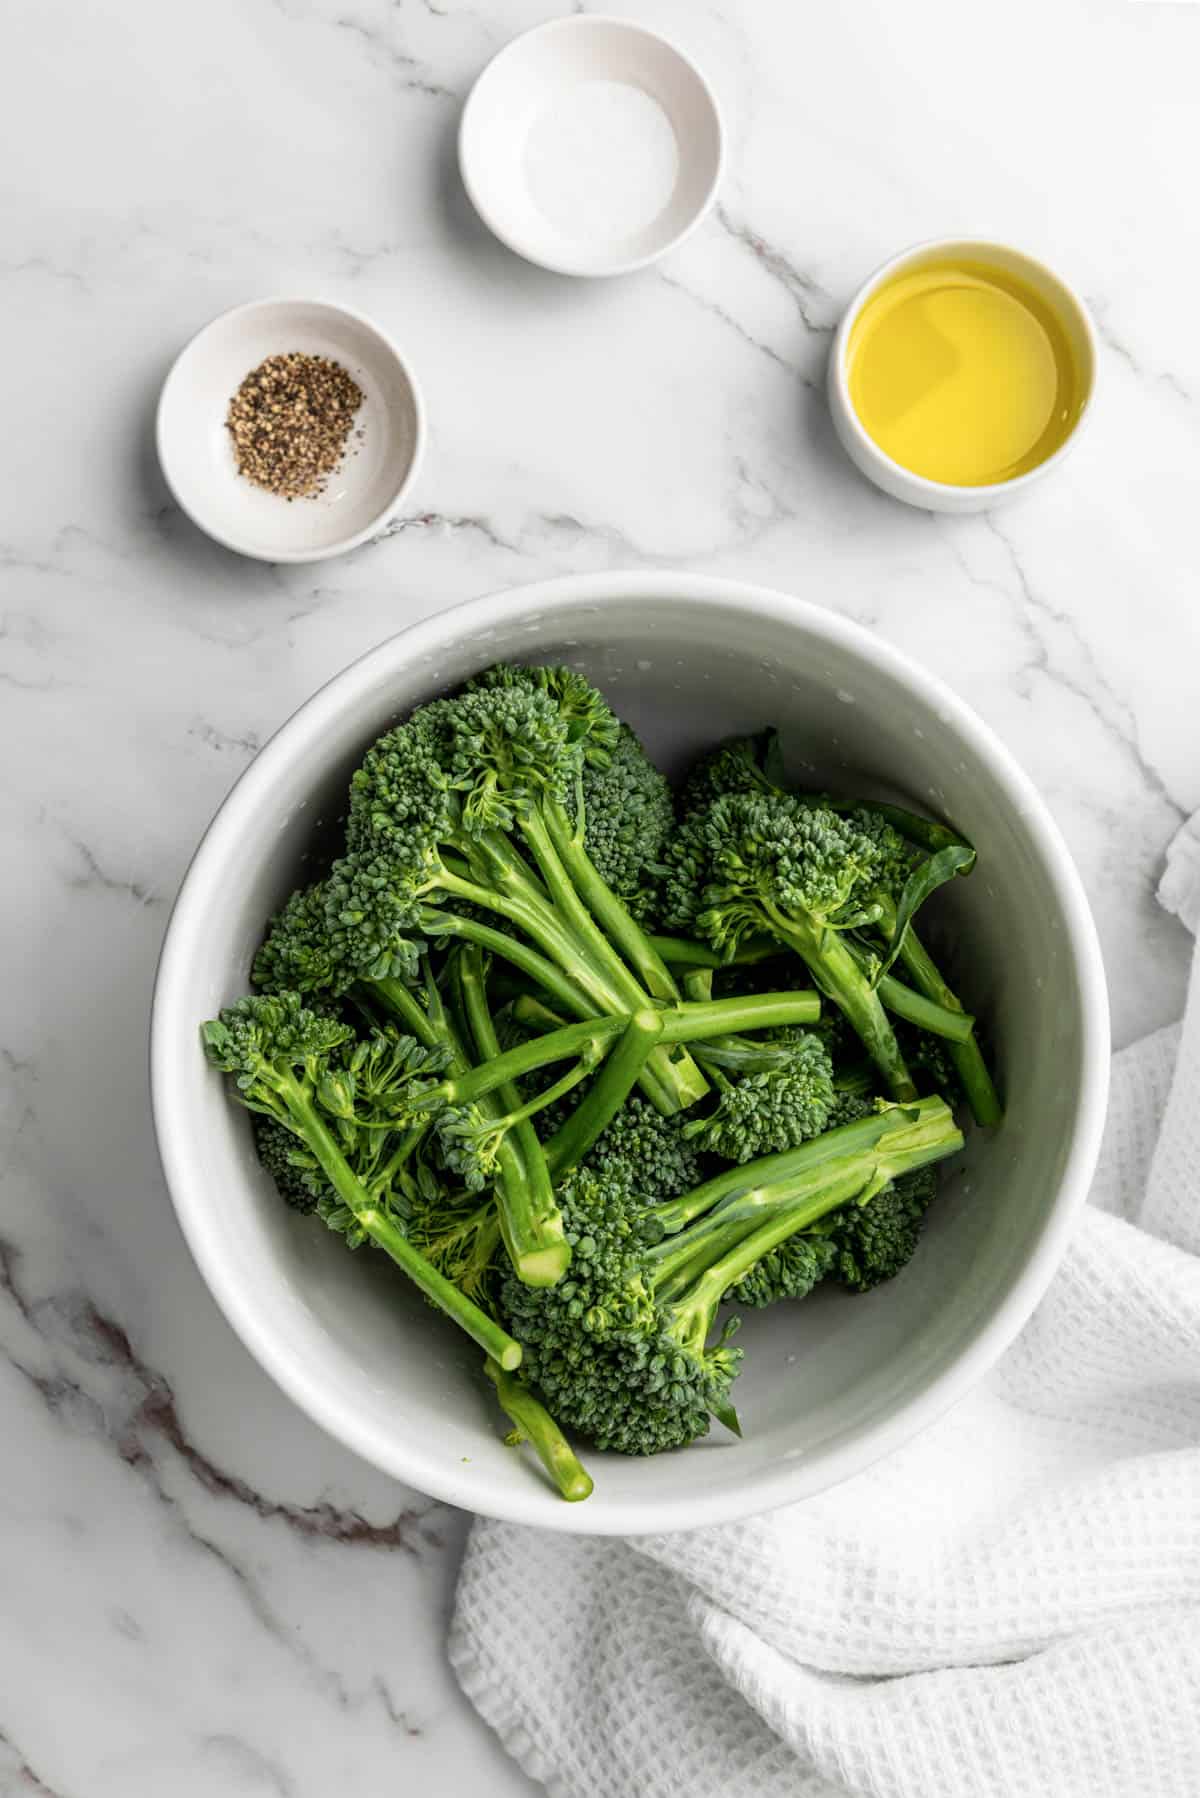 Washed and trimmed broccolini in a bowl with oil, salt, and pepper.